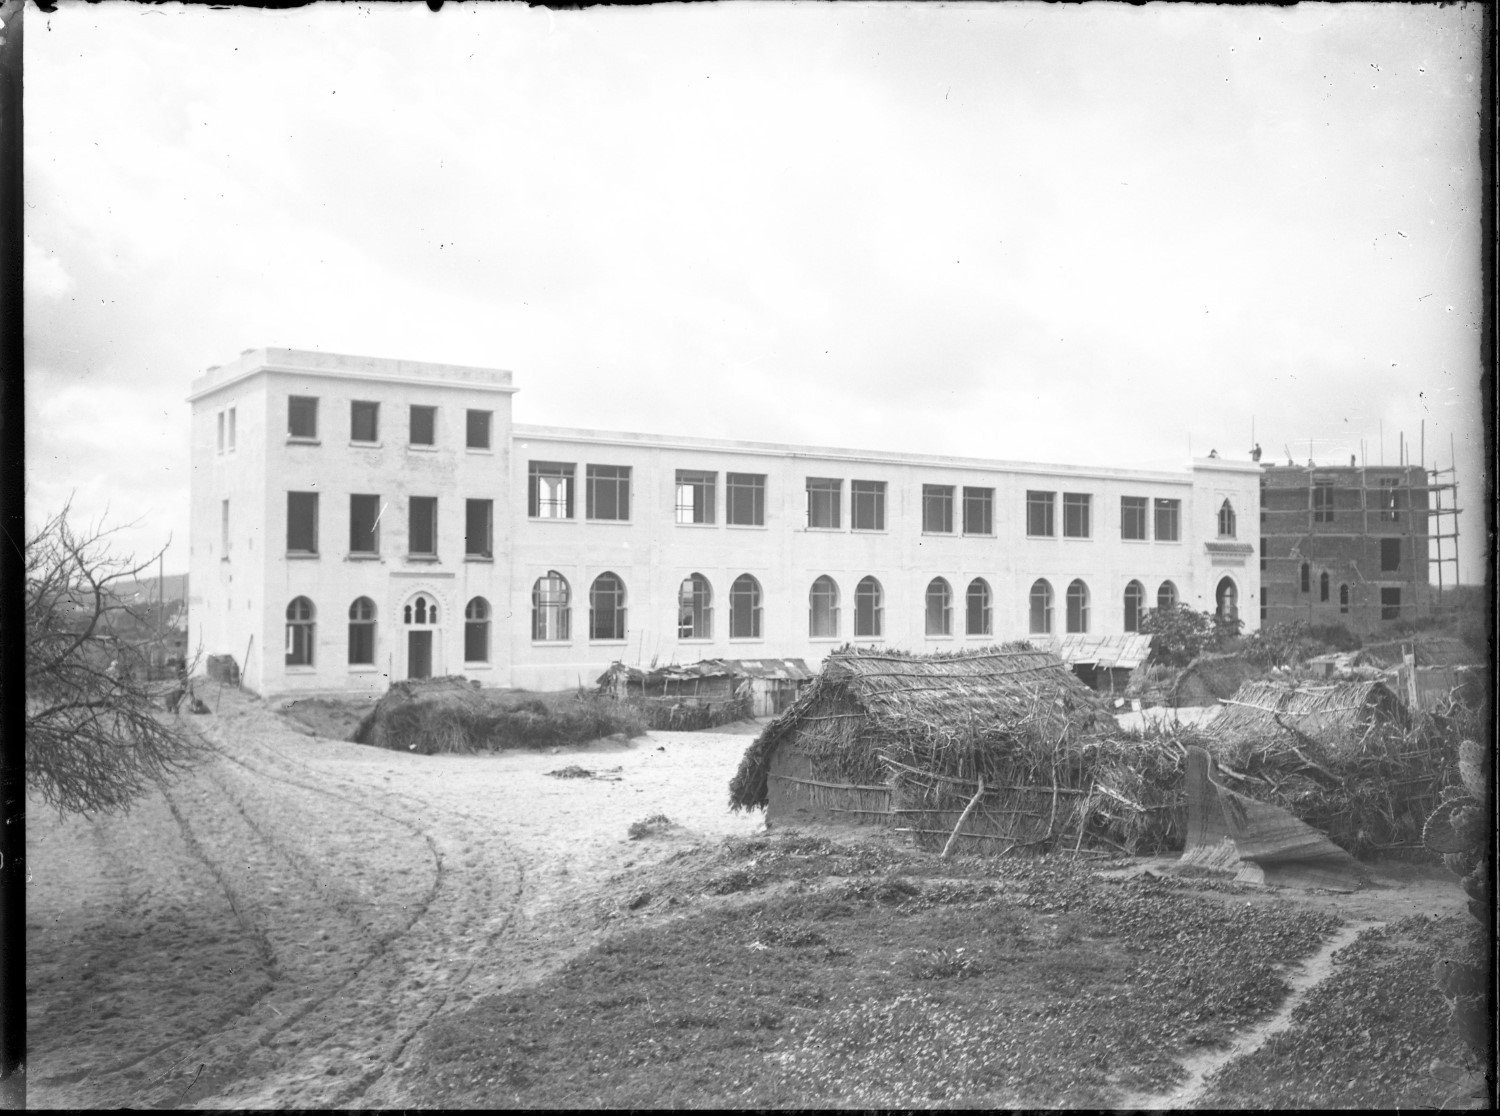 Lycée Regnault construction with straw huts in front 